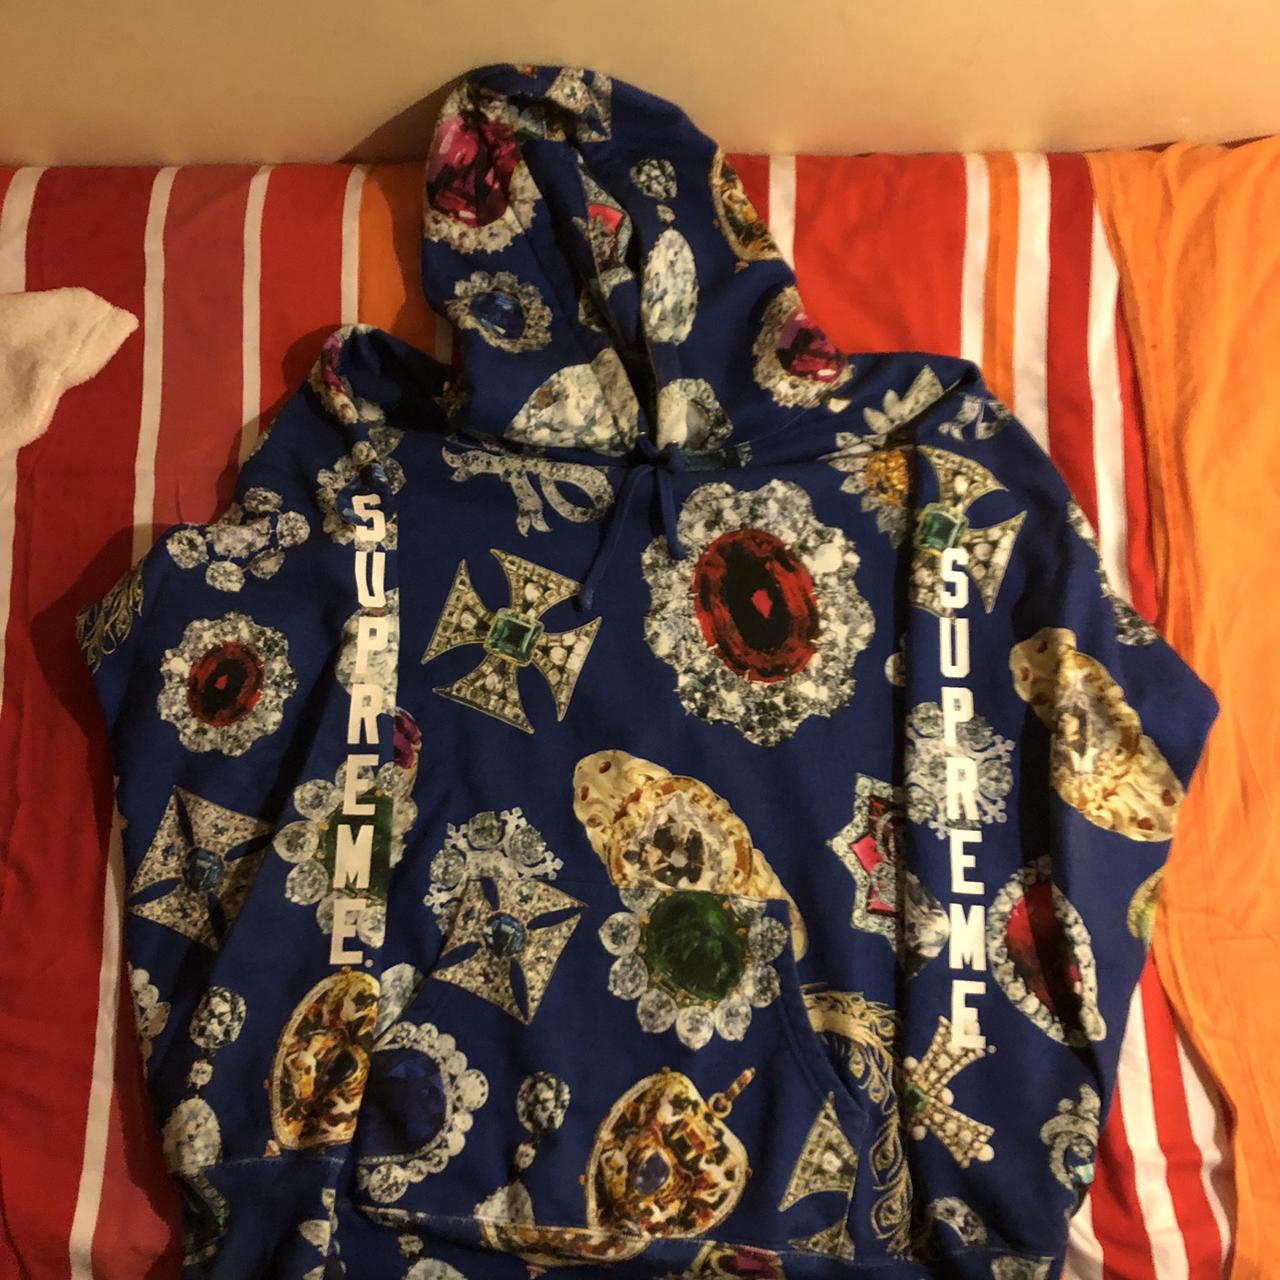 Supreme sweater Perfect condition Tag size XL - Depop